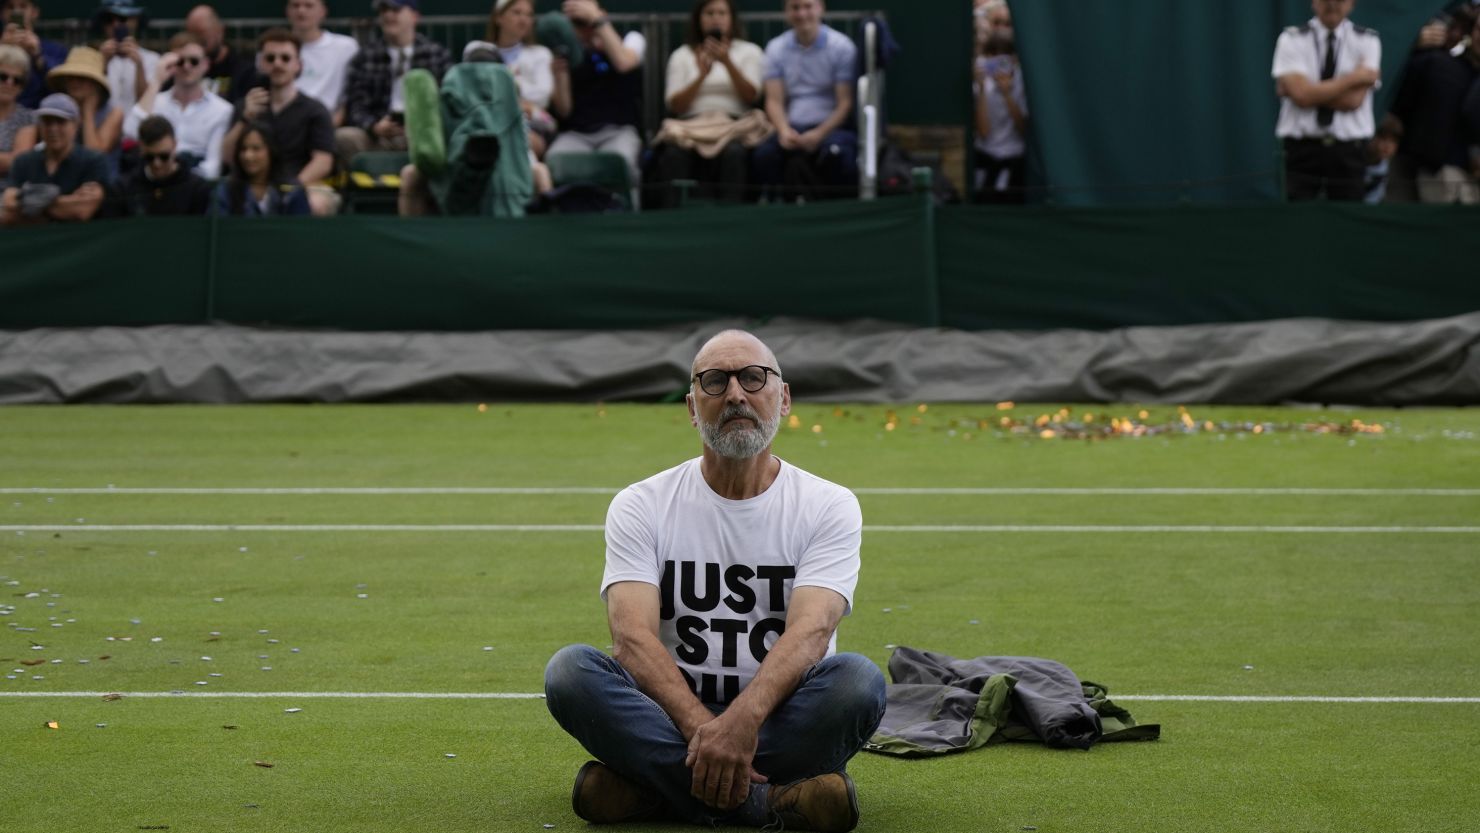 Just Stop Oil protesters disrupt match at Wimbledon